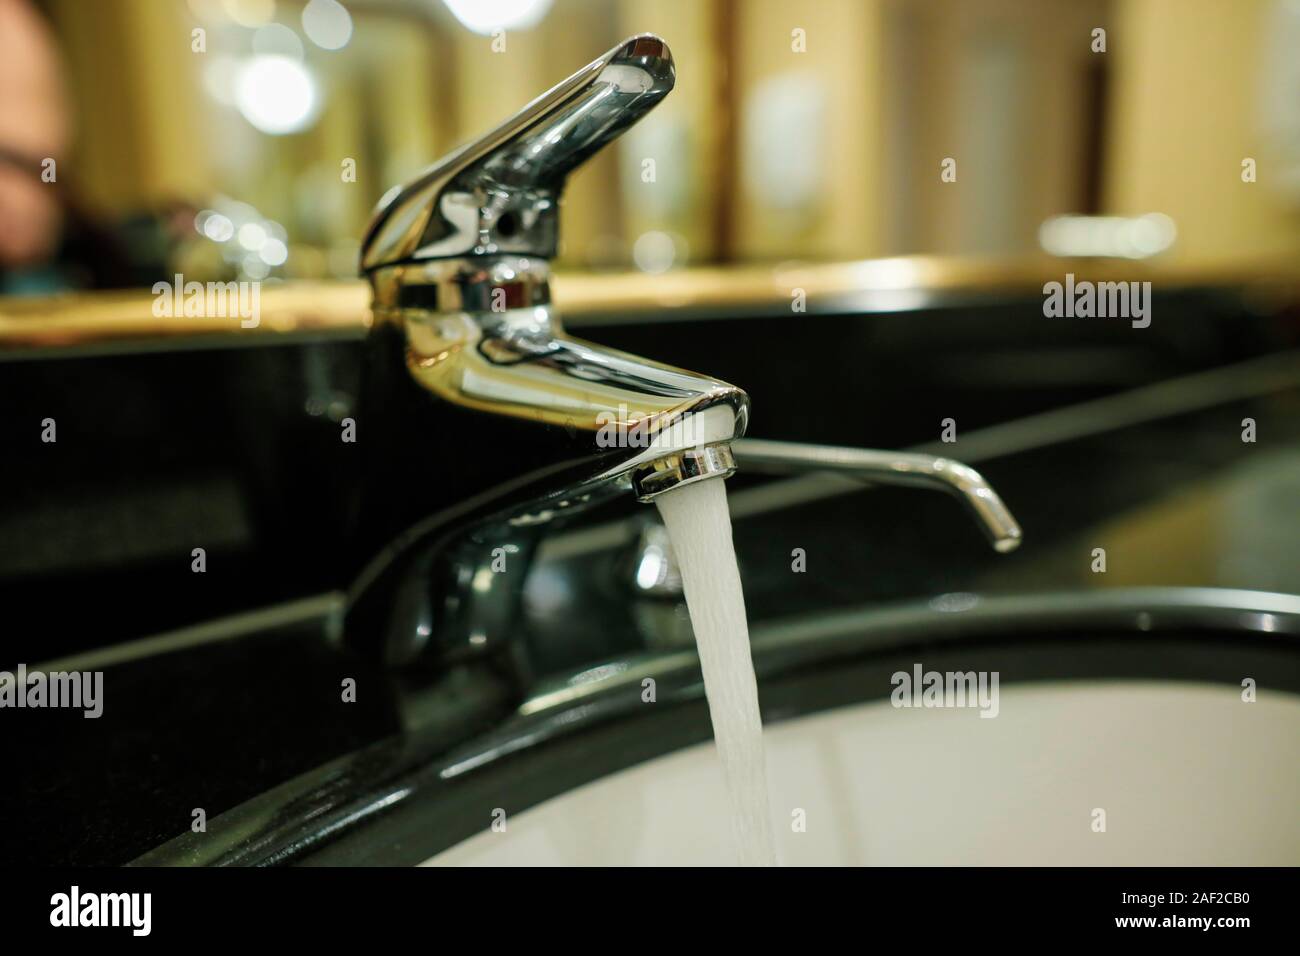 Shallow depth of field (selective focus) image with water running from a faucet and a soap dispenser in a hotel bathroom. Stock Photo